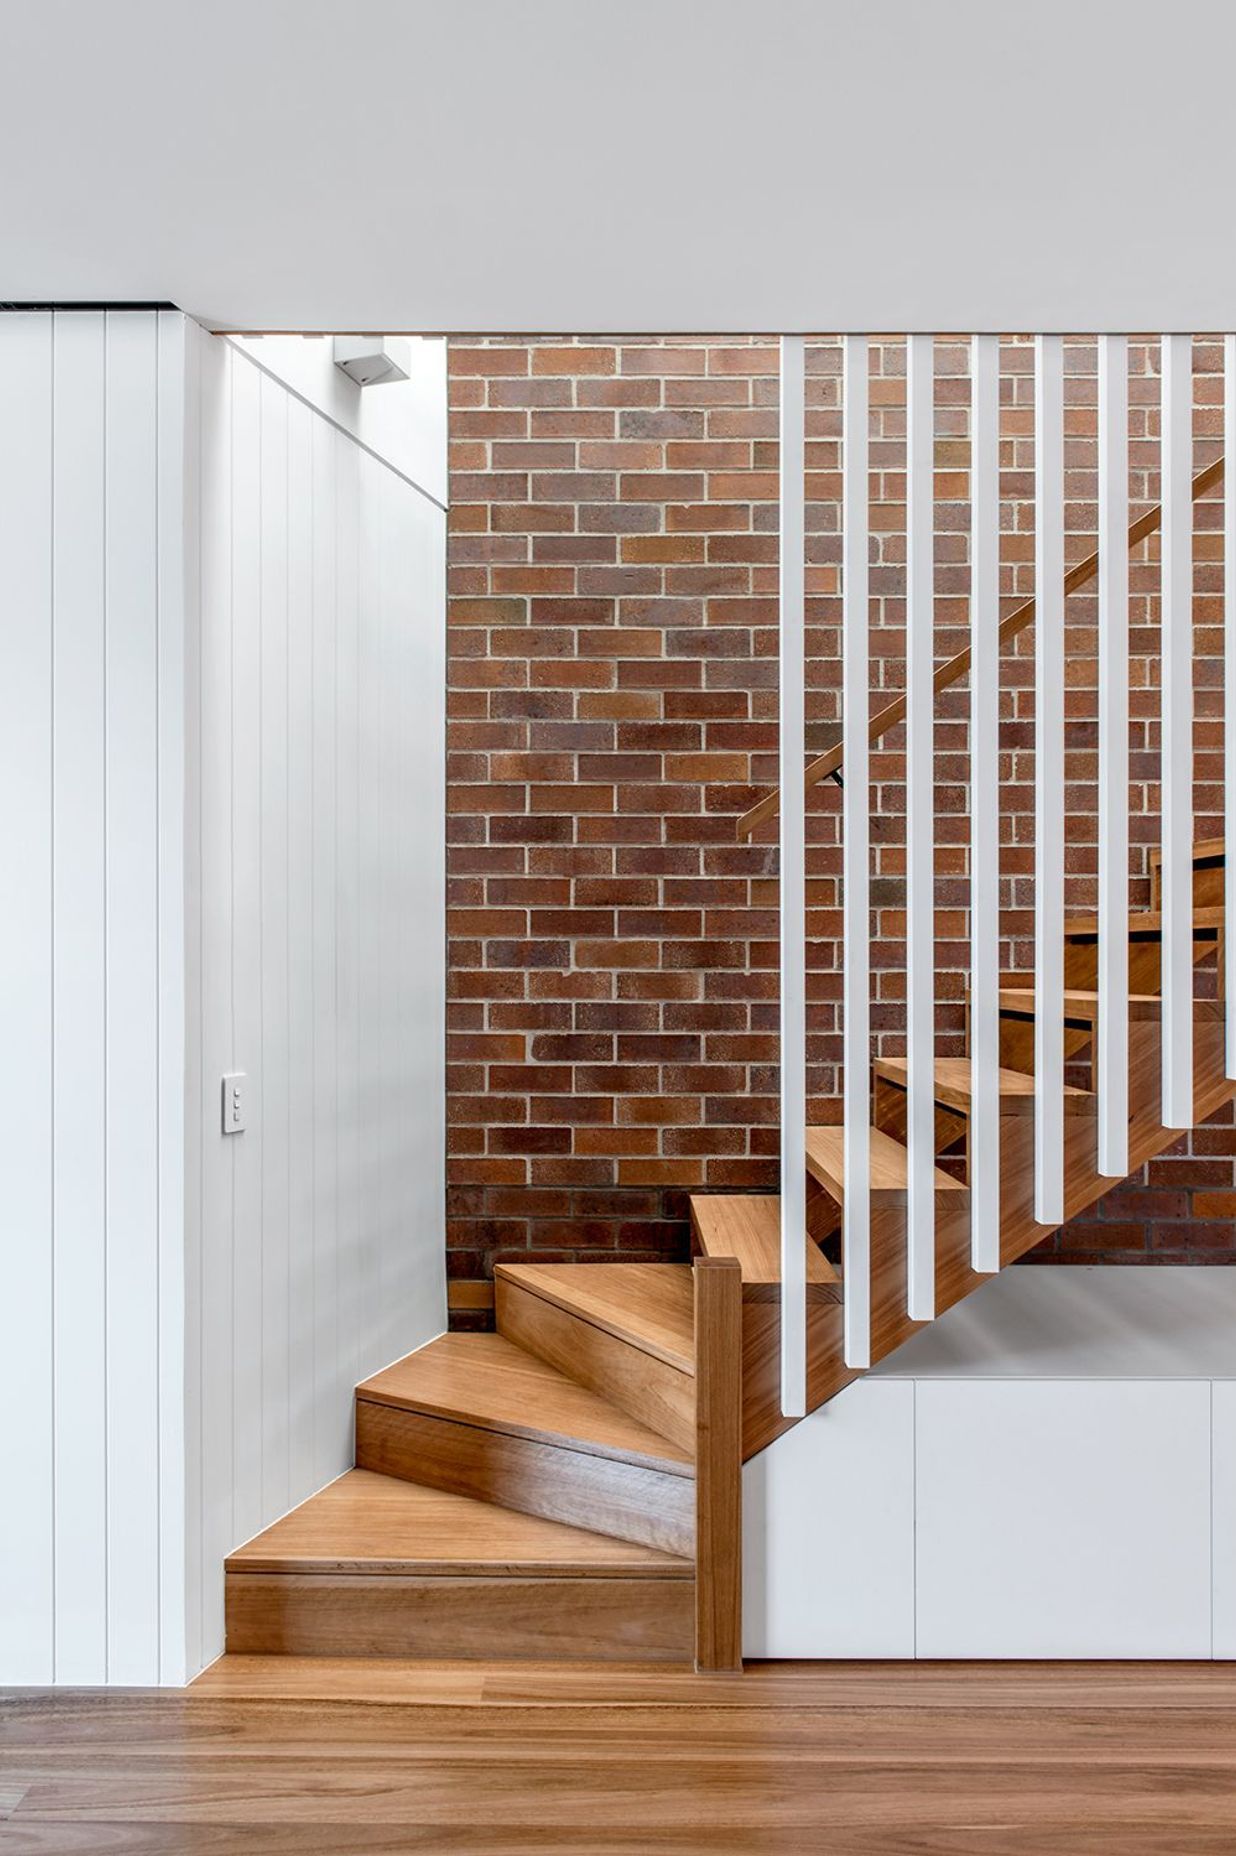 Photography: Cathy Schusler | Combining solid and lightweight construction, the three new dwellings mesh the qualities of the traditional terrace house with those of the Queenslander. Locally sourced face brick are used in Party walls, with floors and ext